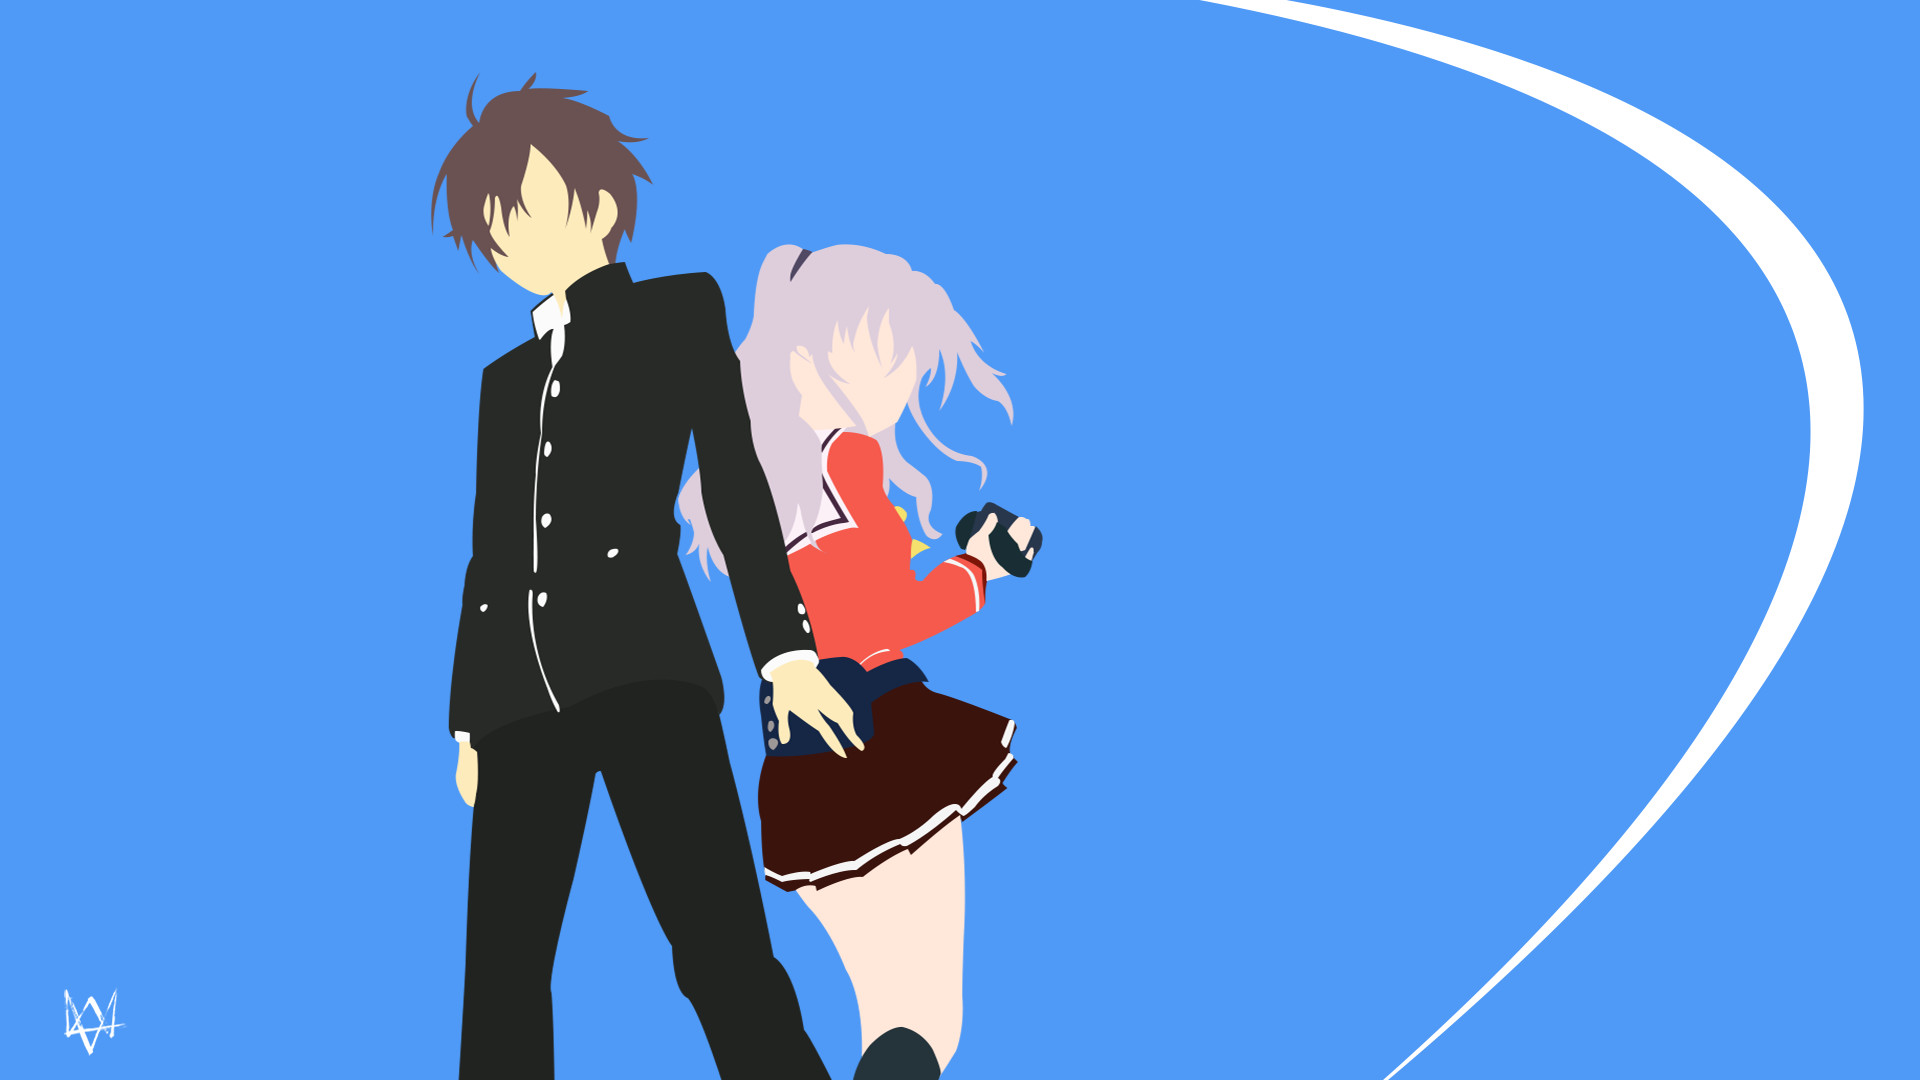 … Yuu and Nao (Charlotte) Minimalist Wallpaper Anime by Lucifer012